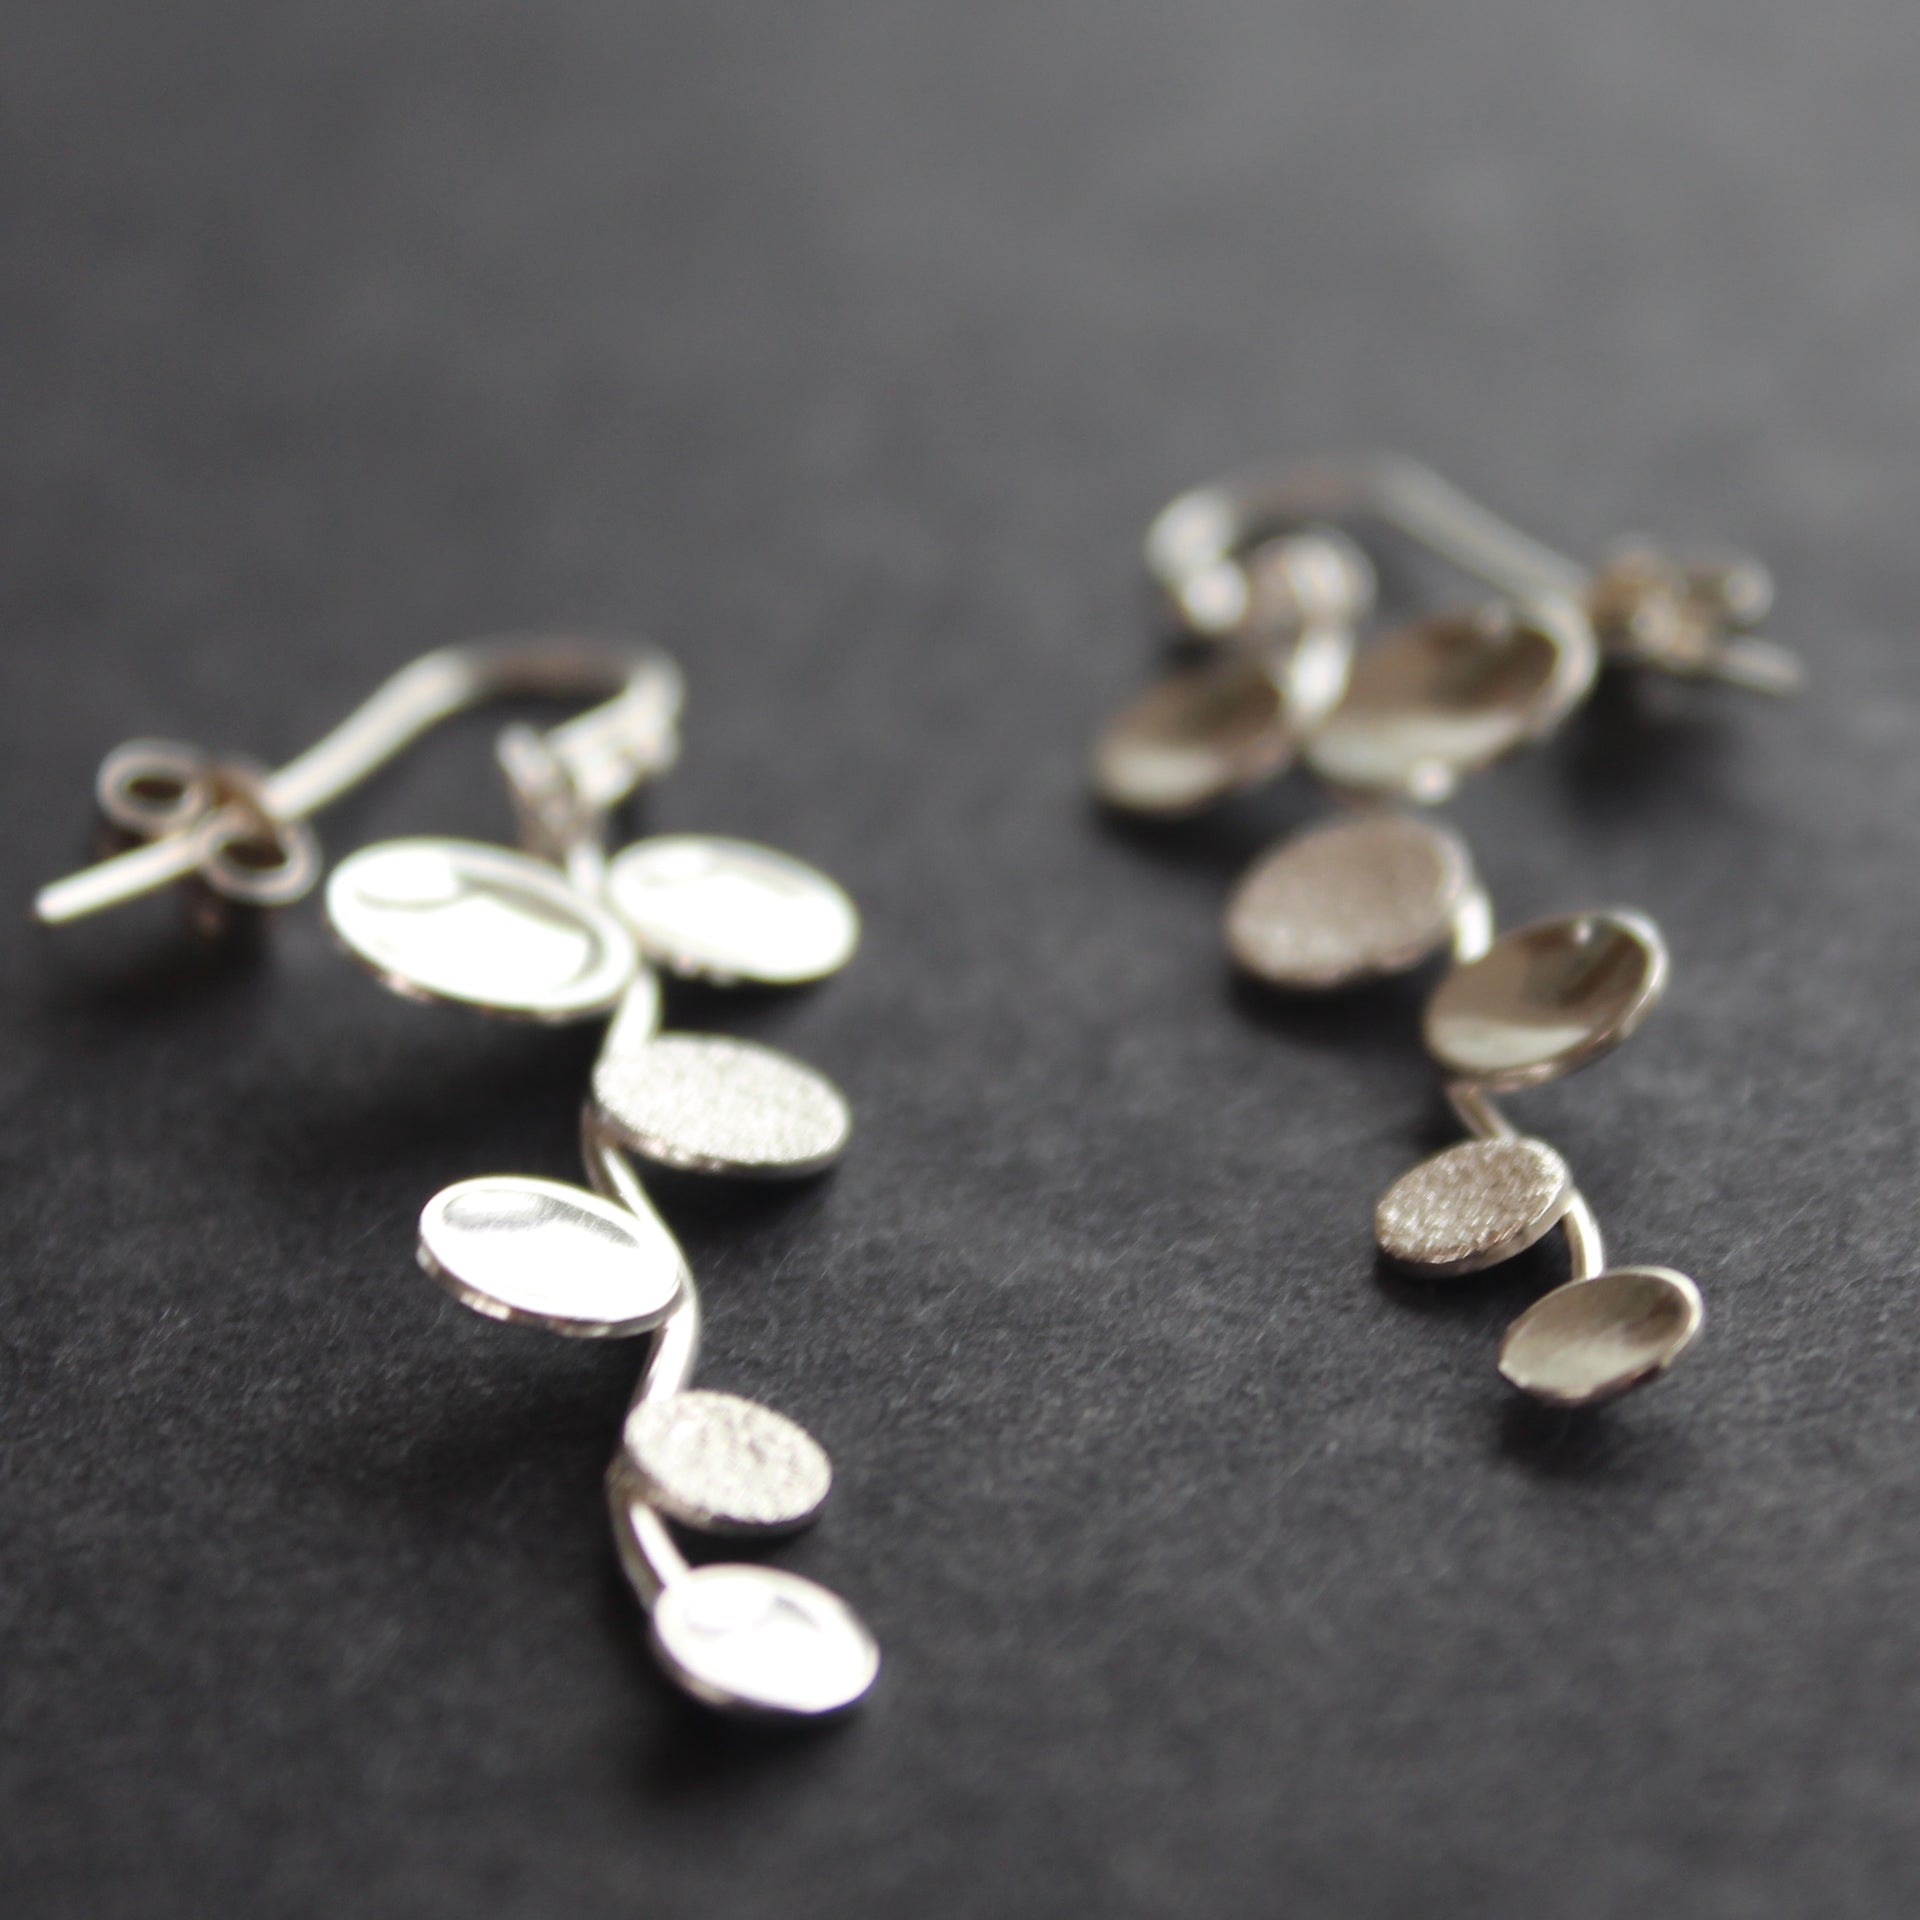 Long sliver earrings of small circles attached to central curved line made by Beverly Bartlett and shown at the Byre Gallery